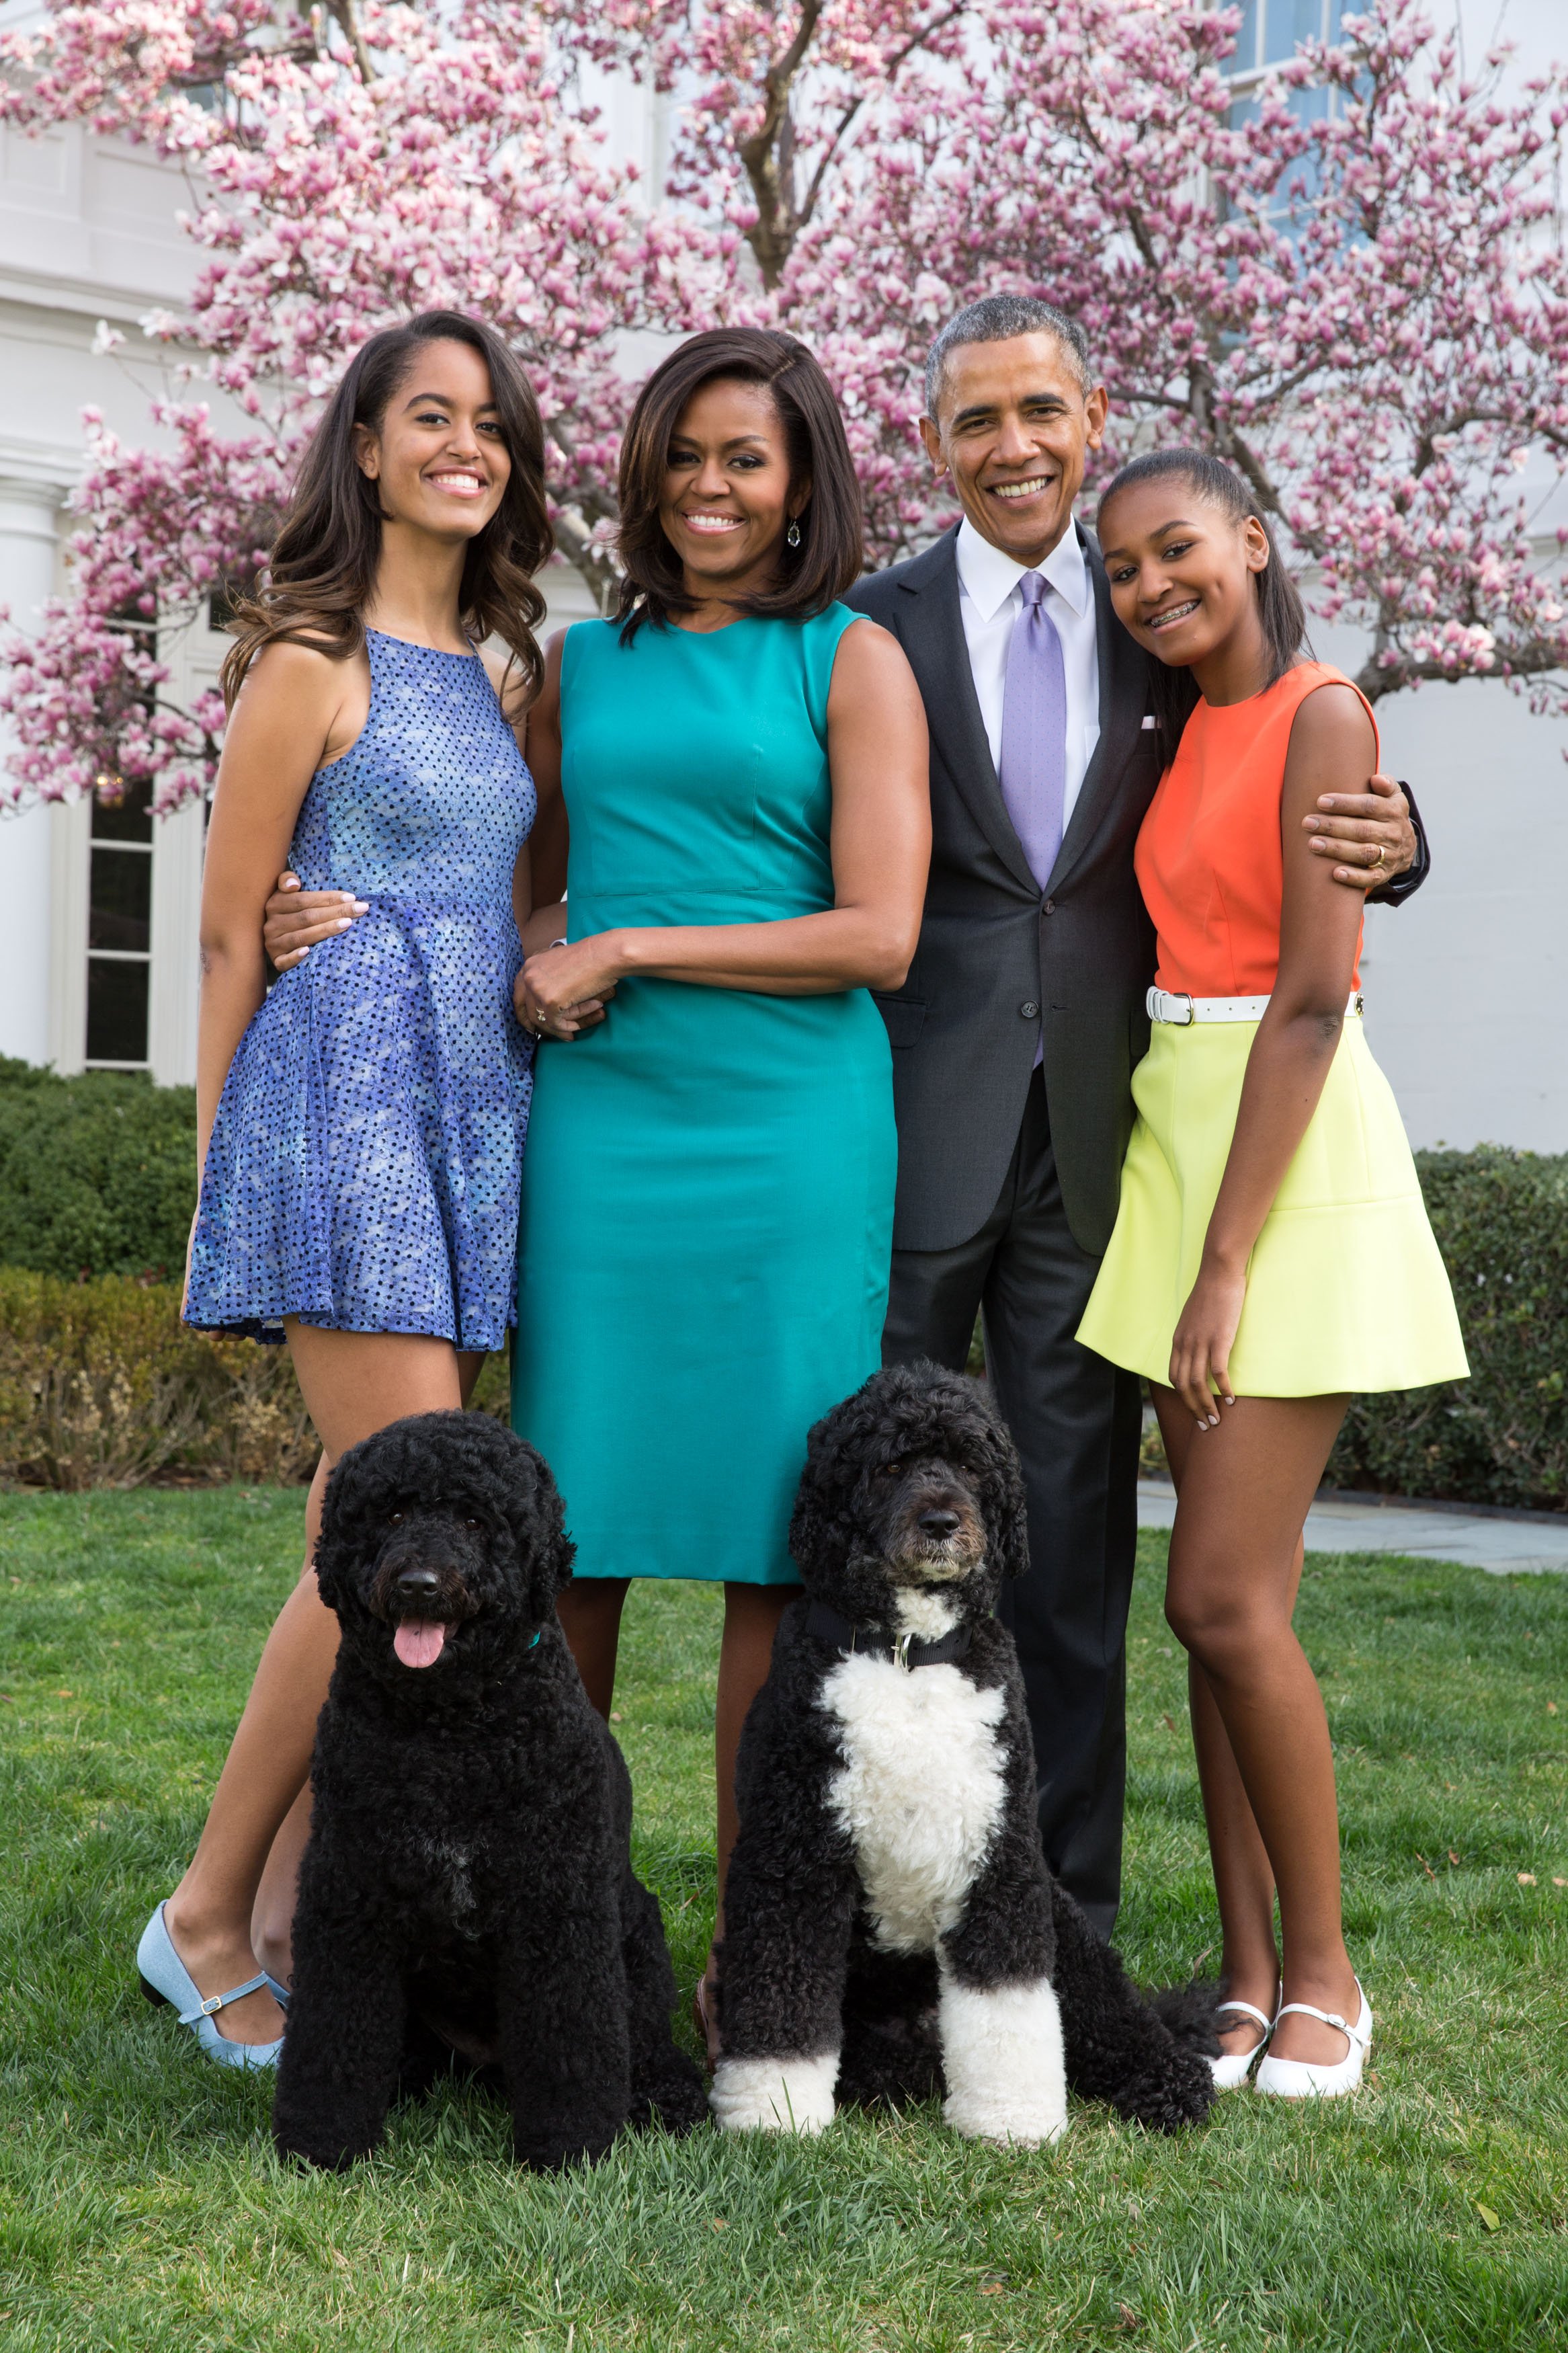 Former U.S. President Barack Obama, Michelle Obama with Malia and Sasha in the Rose Garden of the White House, in Washington, DC. | Source: Getty Images.